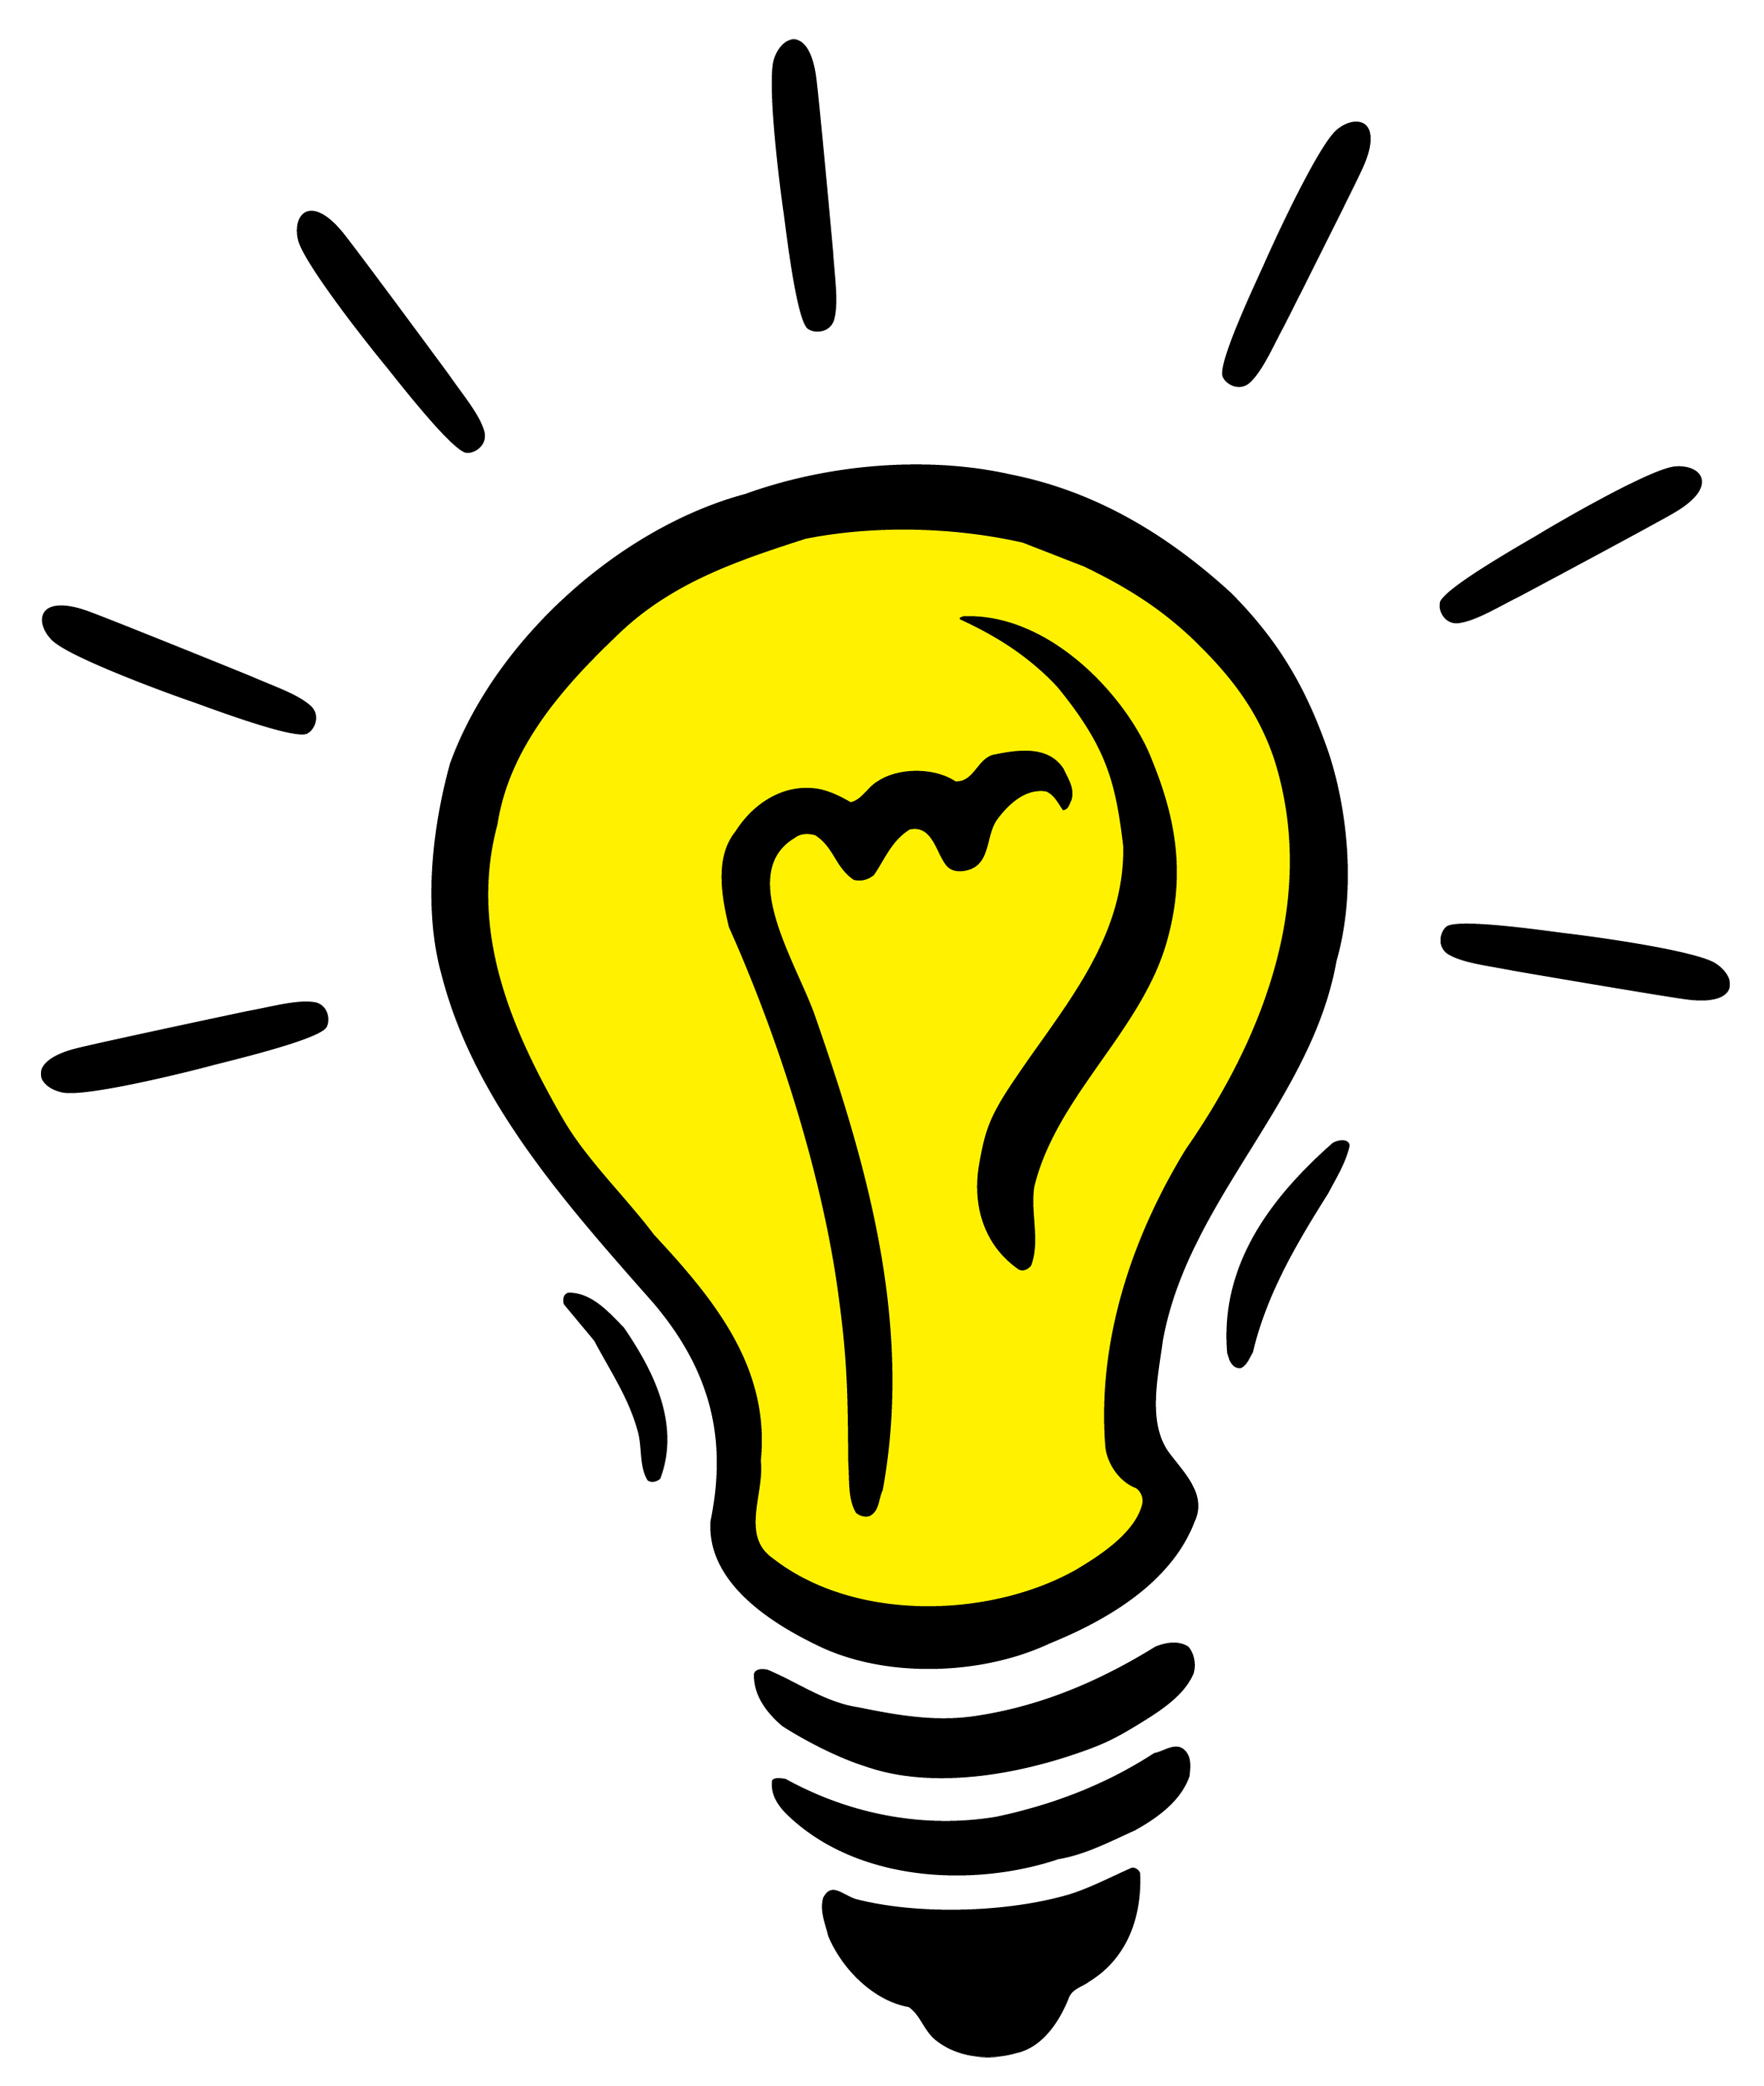 Introducing “The Light Bulb” from Citrix Education | Citrix Blogs